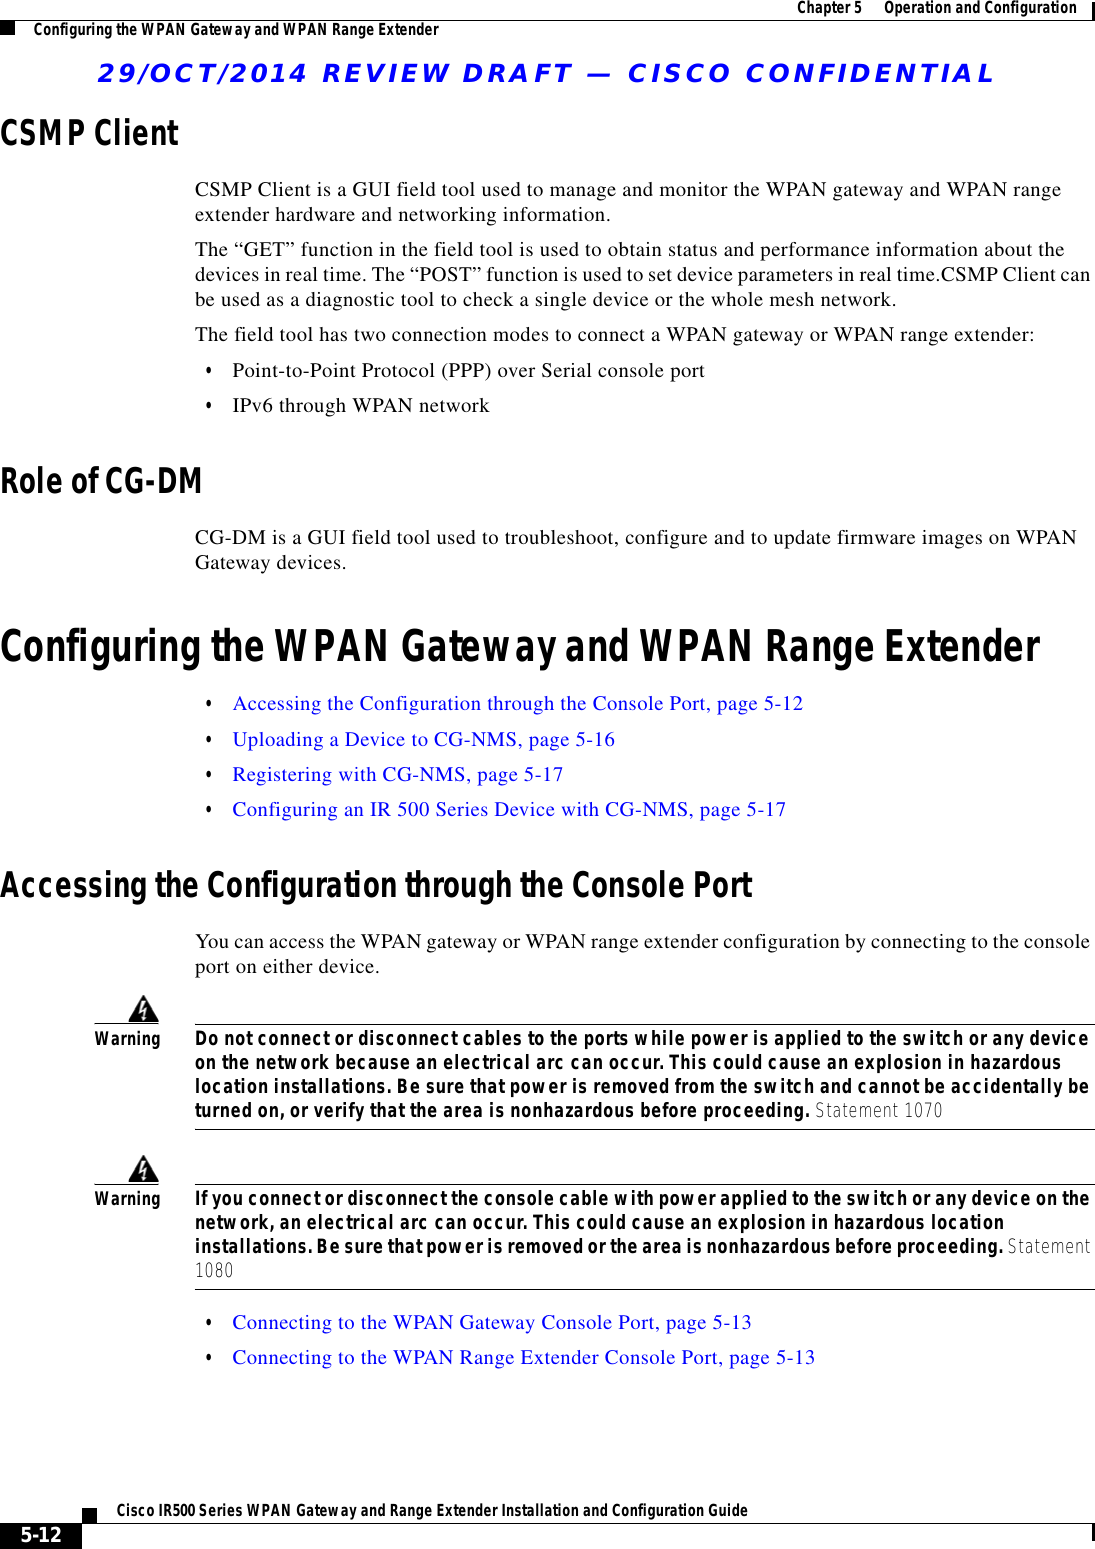 29/OCT/2014 REVIEW DRAFT — CISCO CONFIDENTIAL5-12Cisco IR500 Series WPAN Gateway and Range Extender Installation and Configuration Guide  Chapter 5      Operation and Configuration Configuring the WPAN Gateway and WPAN Range ExtenderCSMP ClientCSMP Client is a GUI field tool used to manage and monitor the WPAN gateway and WPAN range extender hardware and networking information. The “GET” function in the field tool is used to obtain status and performance information about the devices in real time. The “POST” function is used to set device parameters in real time.CSMP Client can be used as a diagnostic tool to check a single device or the whole mesh network. The field tool has two connection modes to connect a WPAN gateway or WPAN range extender:  • Point-to-Point Protocol (PPP) over Serial console port  • IPv6 through WPAN networkRole of CG-DMCG-DM is a GUI field tool used to troubleshoot, configure and to update firmware images on WPAN Gateway devices.Configuring the WPAN Gateway and WPAN Range Extender  • Accessing the Configuration through the Console Port, page 5-12  • Uploading a Device to CG-NMS, page 5-16  • Registering with CG-NMS, page 5-17  • Configuring an IR 500 Series Device with CG-NMS, page 5-17Accessing the Configuration through the Console PortYou can access the WPAN gateway or WPAN range extender configuration by connecting to the console port on either device.WarningDo not connect or disconnect cables to the ports while power is applied to the switch or any device on the network because an electrical arc can occur. This could cause an explosion in hazardous location installations. Be sure that power is removed from the switch and cannot be accidentally be turned on, or verify that the area is nonhazardous before proceeding. Statement 1070WarningIf you connect or disconnect the console cable with power applied to the switch or any device on the network, an electrical arc can occur. This could cause an explosion in hazardous location installations. Be sure that power is removed or the area is nonhazardous before proceeding. Statement 1080  • Connecting to the WPAN Gateway Console Port, page 5-13  • Connecting to the WPAN Range Extender Console Port, page 5-13